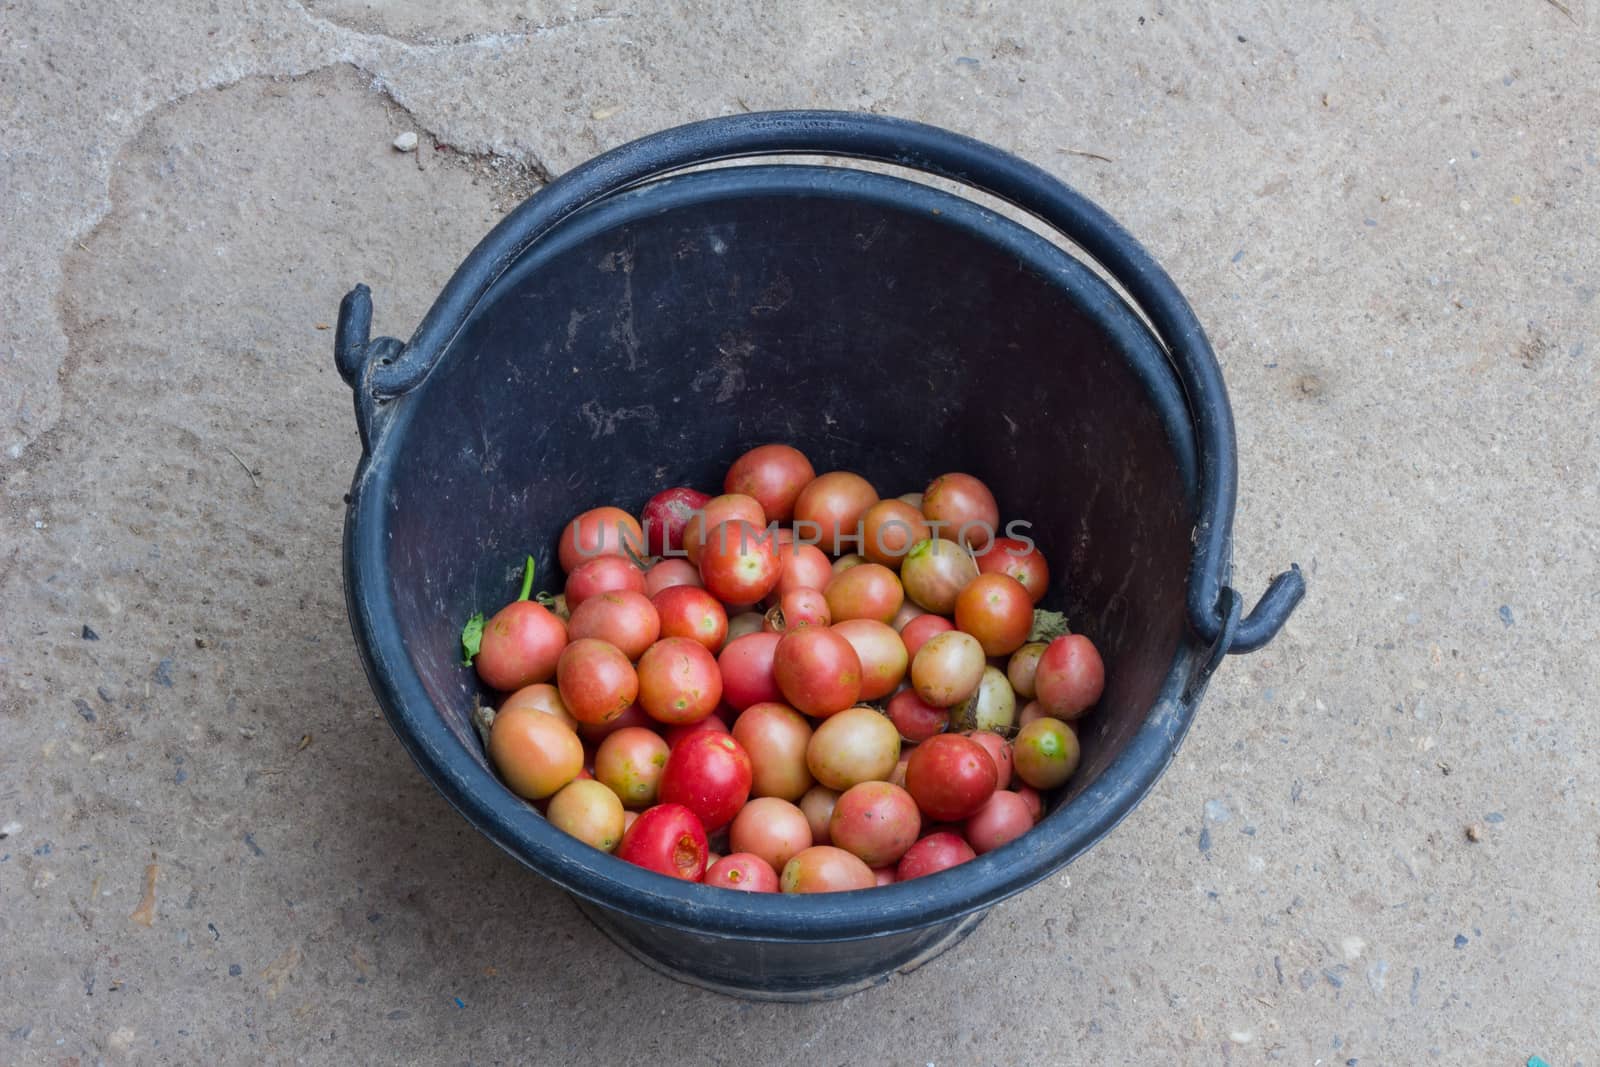 tomatoes in black bucket on floor of concrete by a3701027